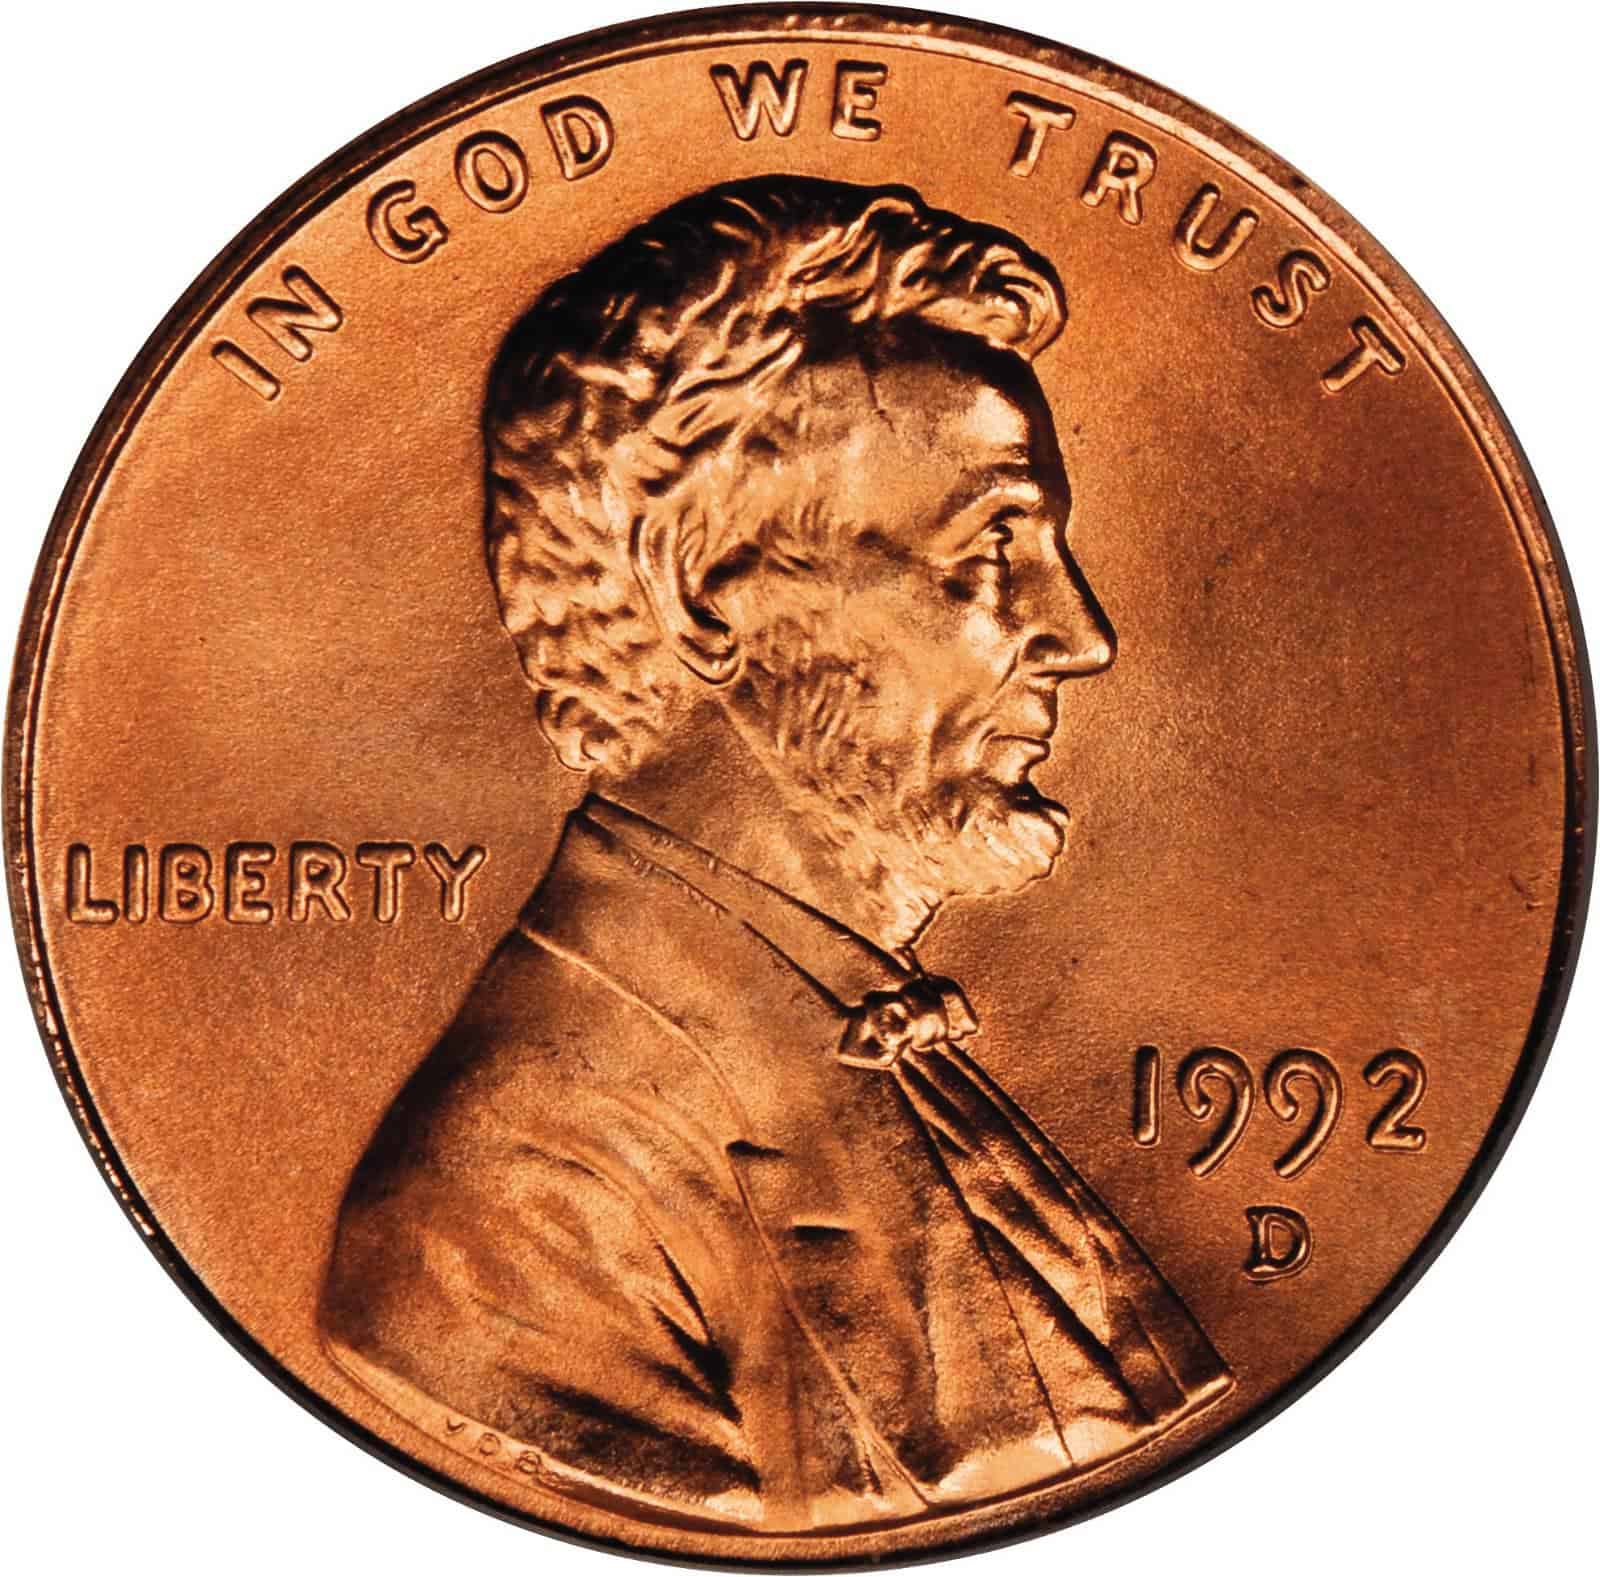 The obverse of the 1992 Memorial penny